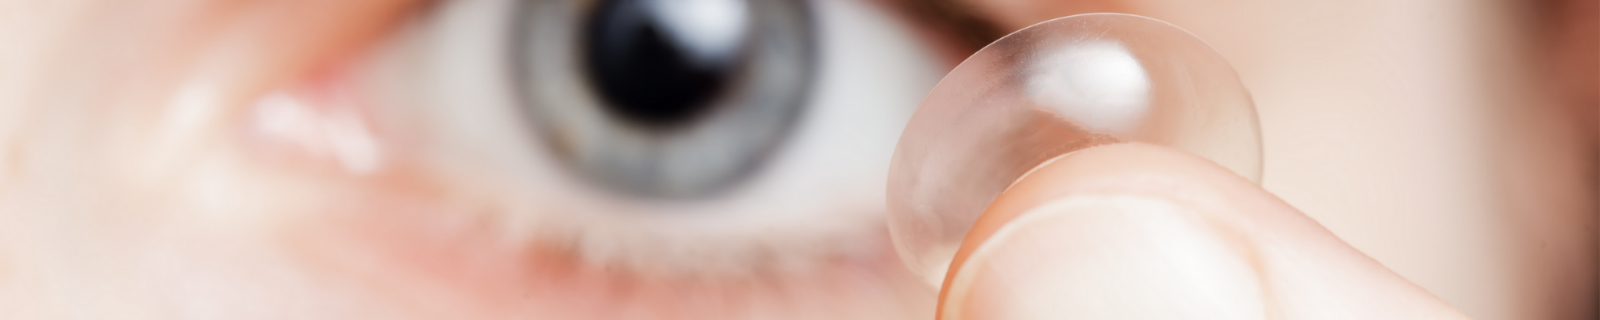 In focus contact lens on a fingertip with an eye in the background